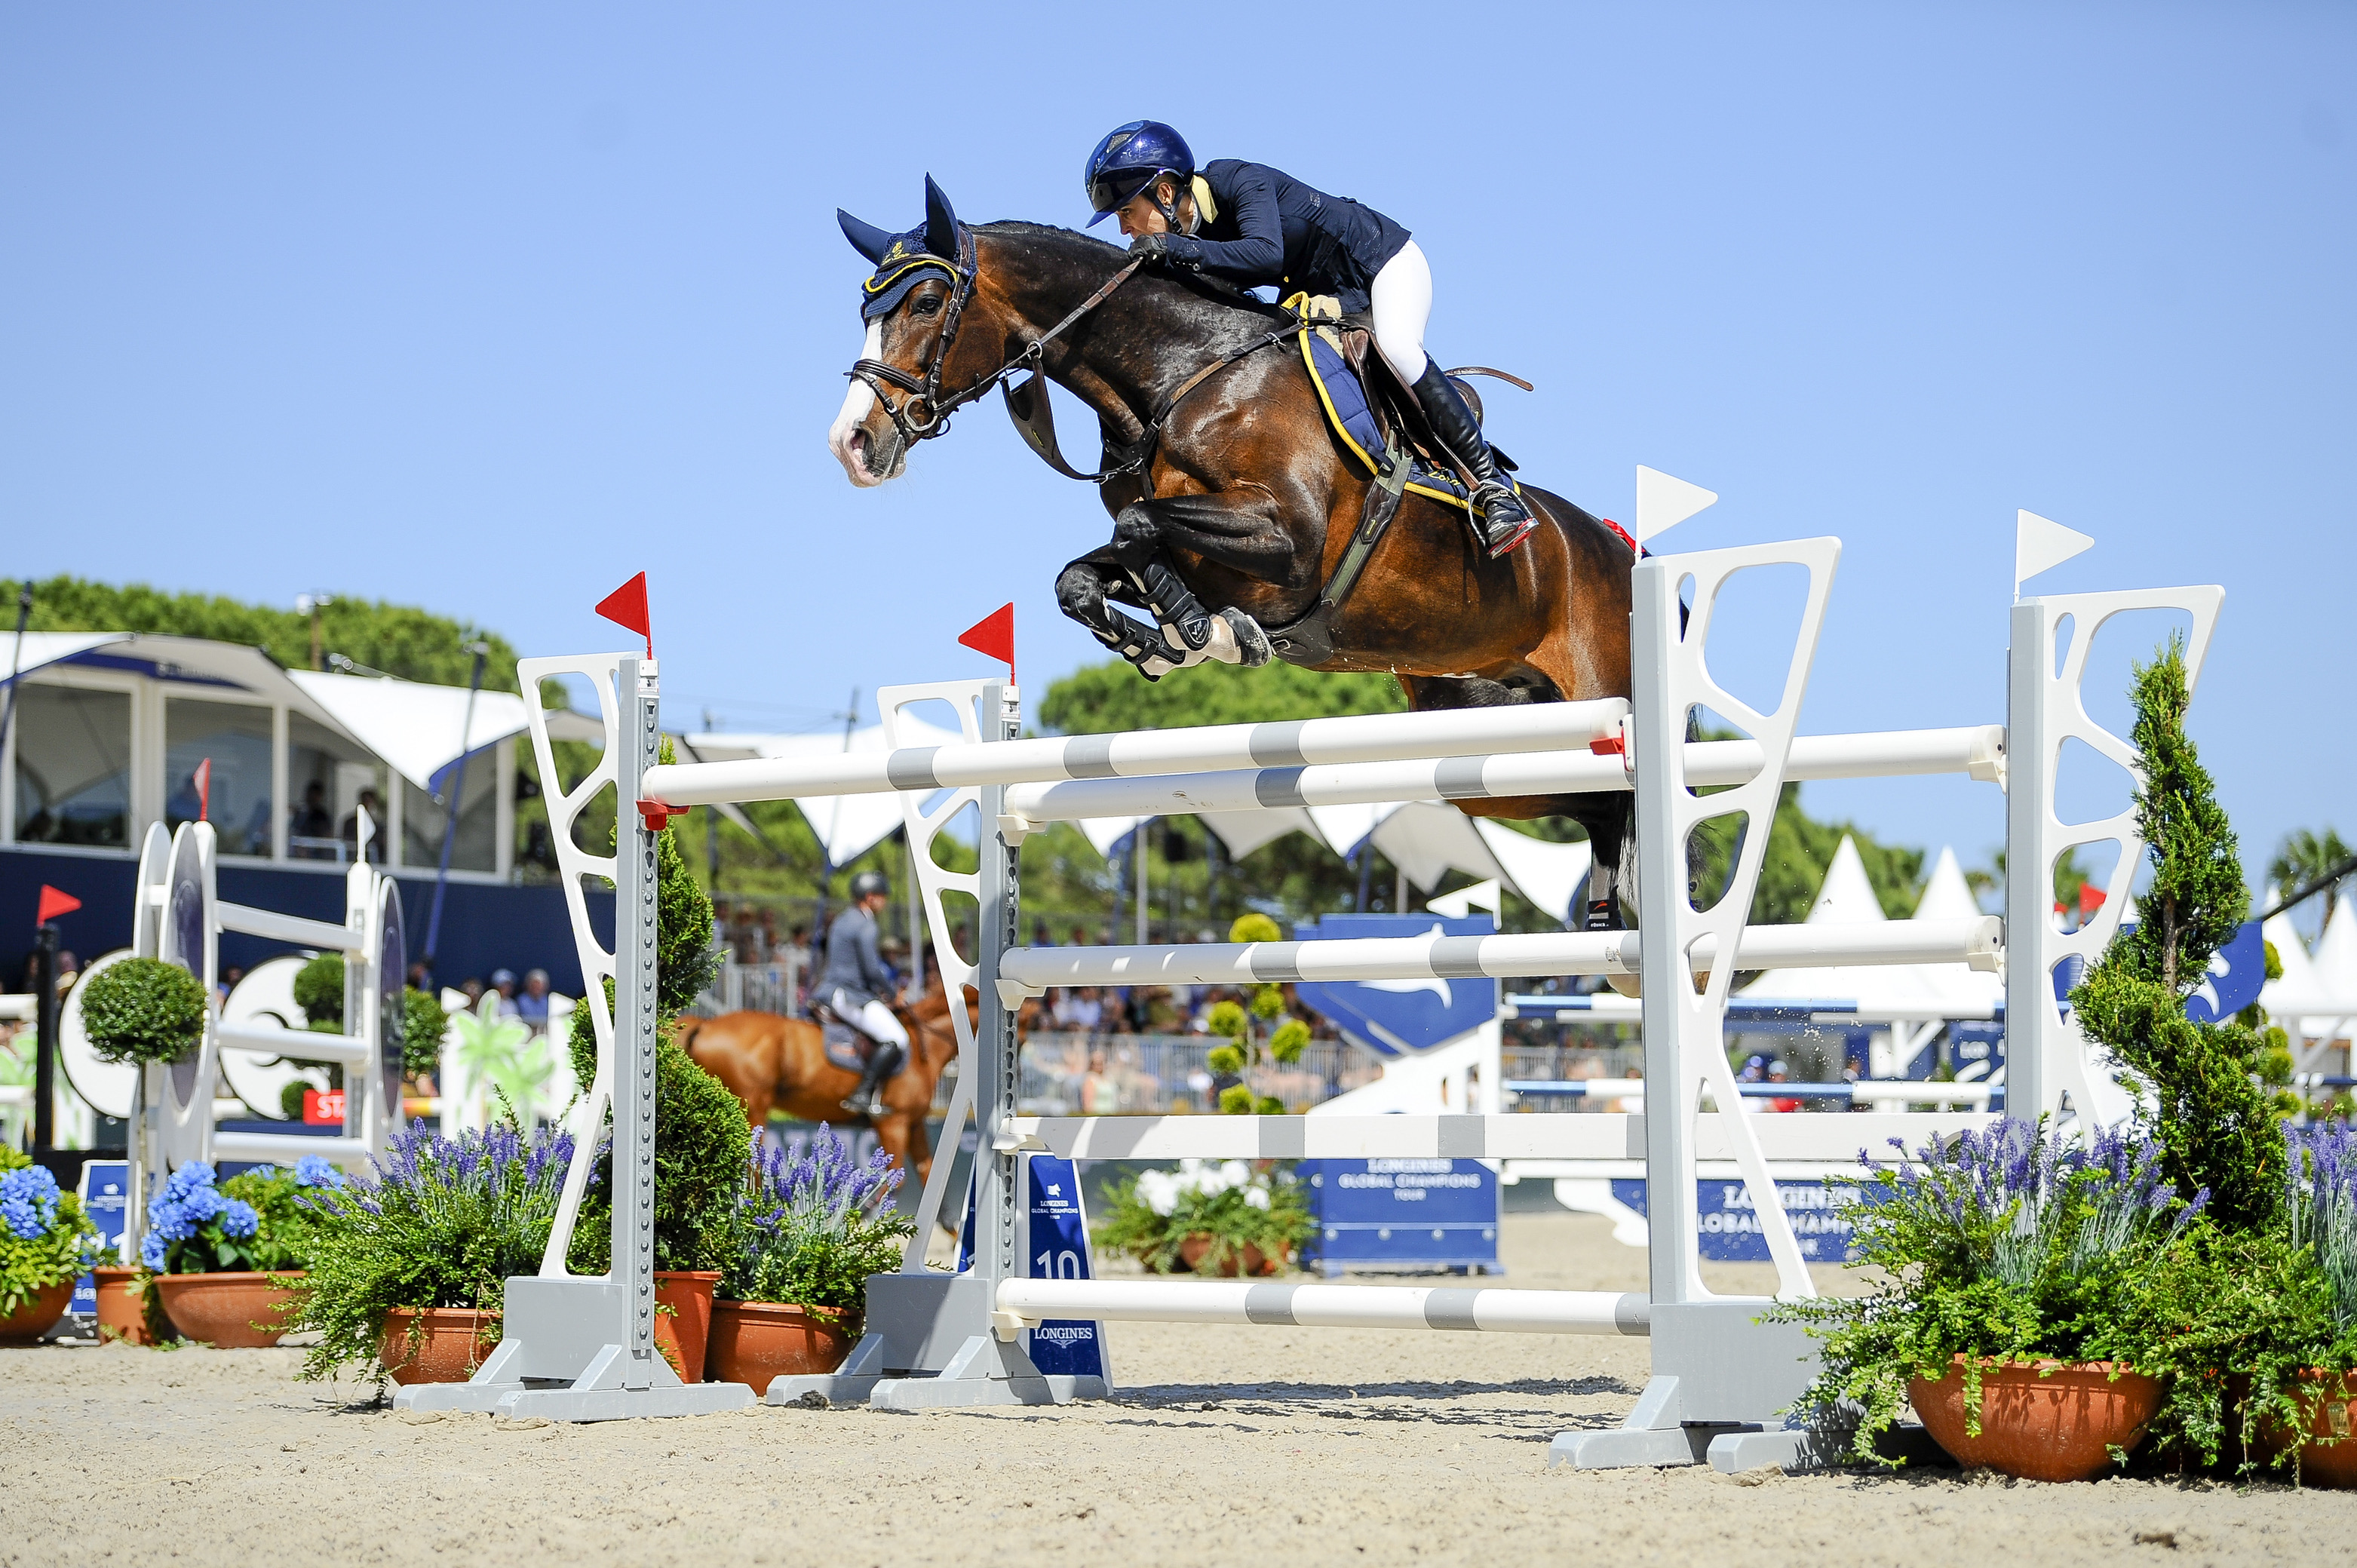 Fellow Castlefield fifth in the Longines Global Champions Tour Grand Prix of Ramatuelle, St. Tropez